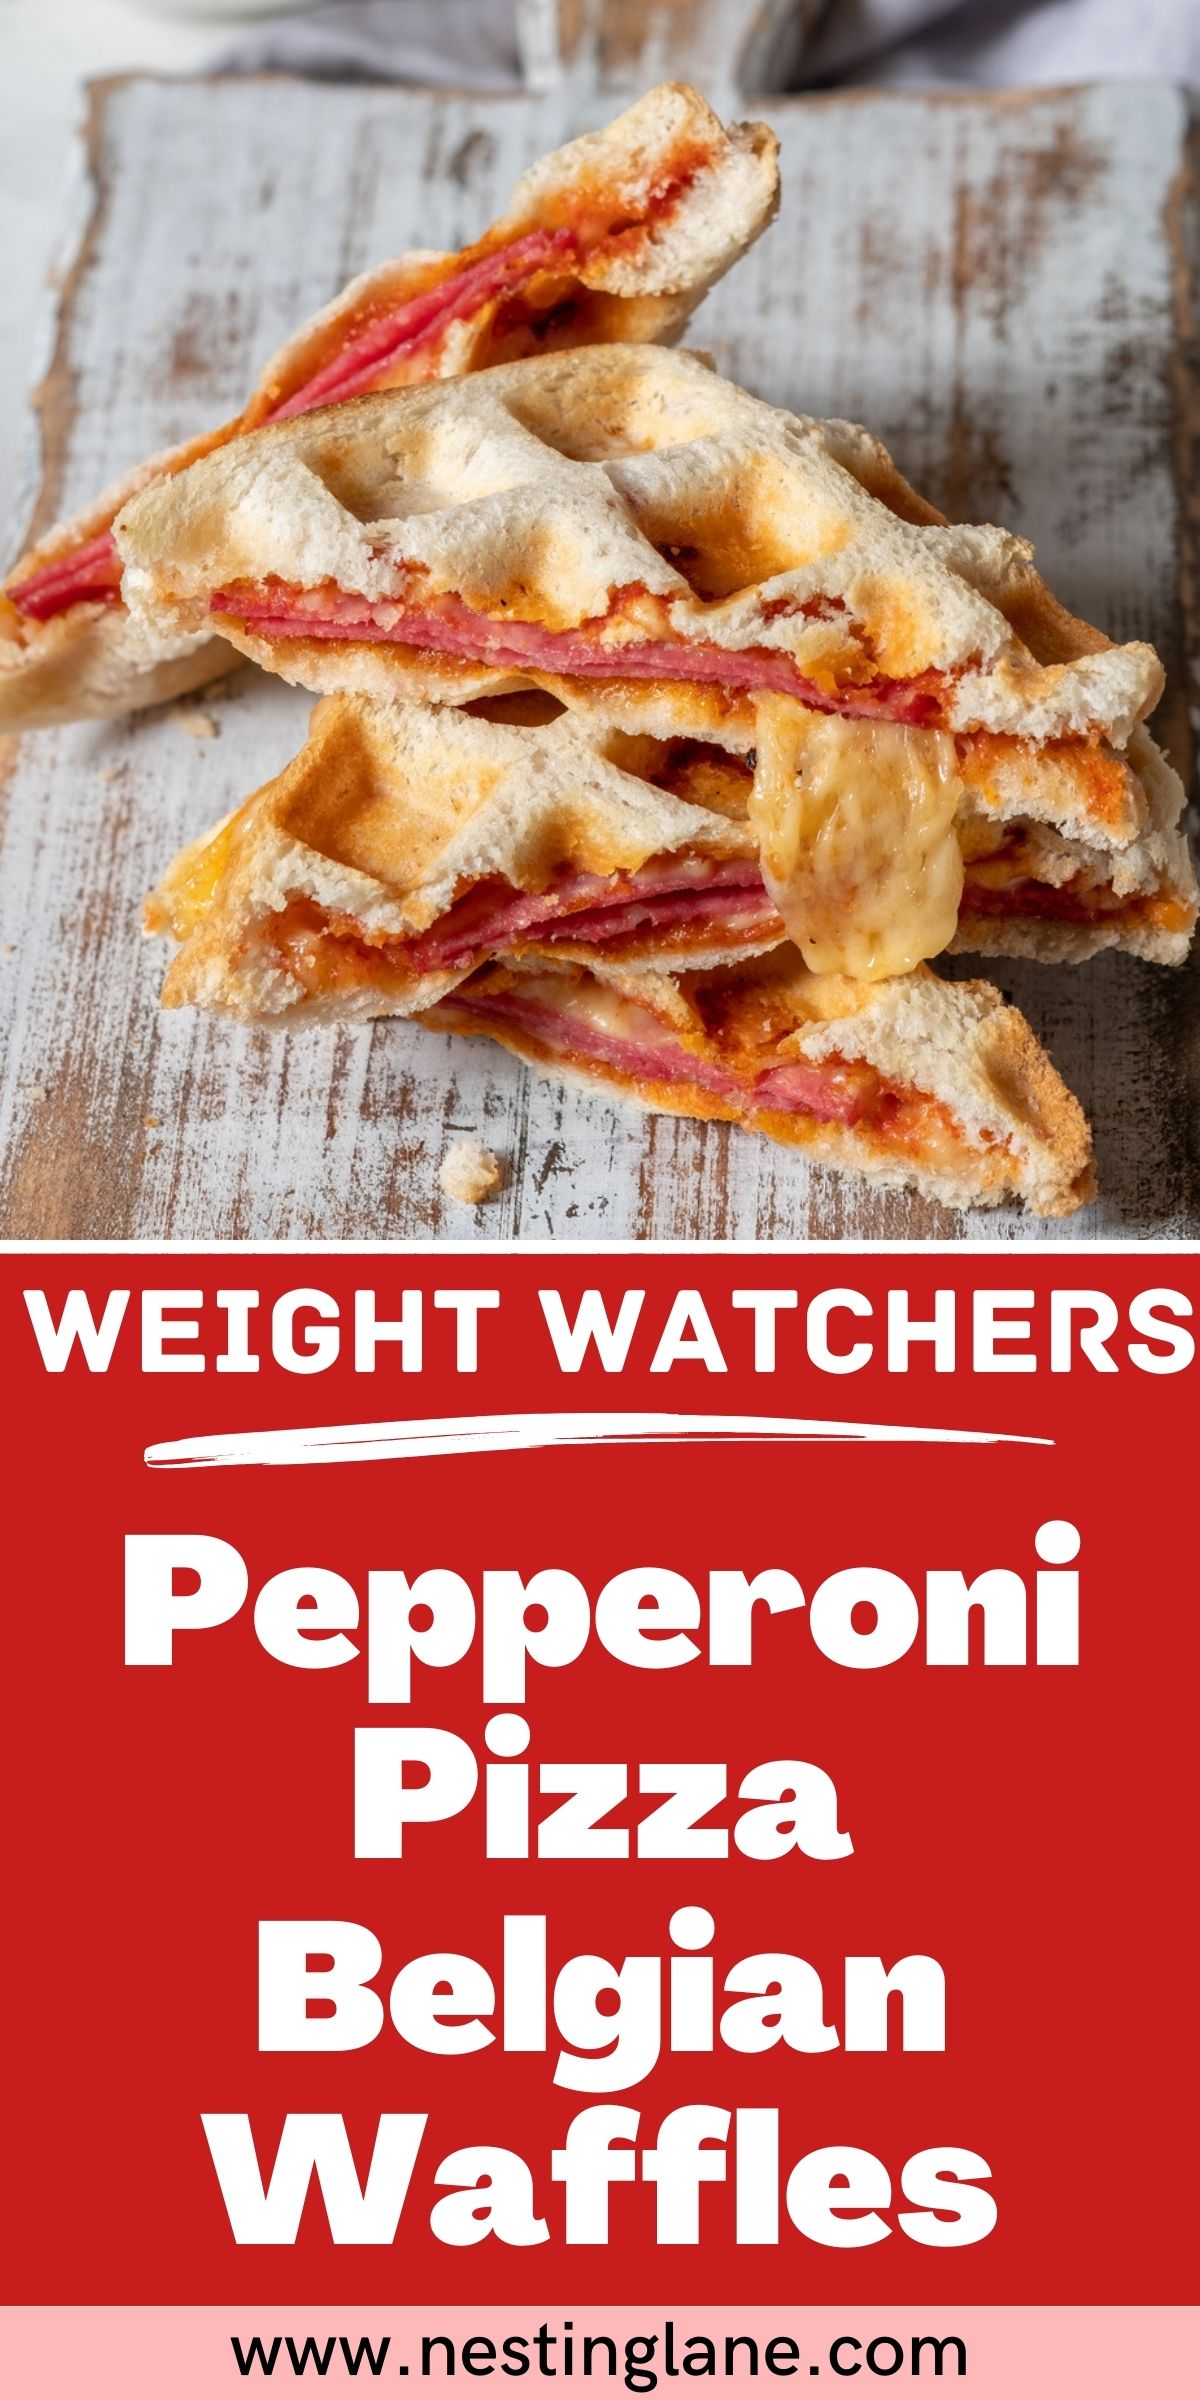 Graphic for Pinterest of Pepperoni Pizza Belgian Waffles (Weight Watchers) Recipe.